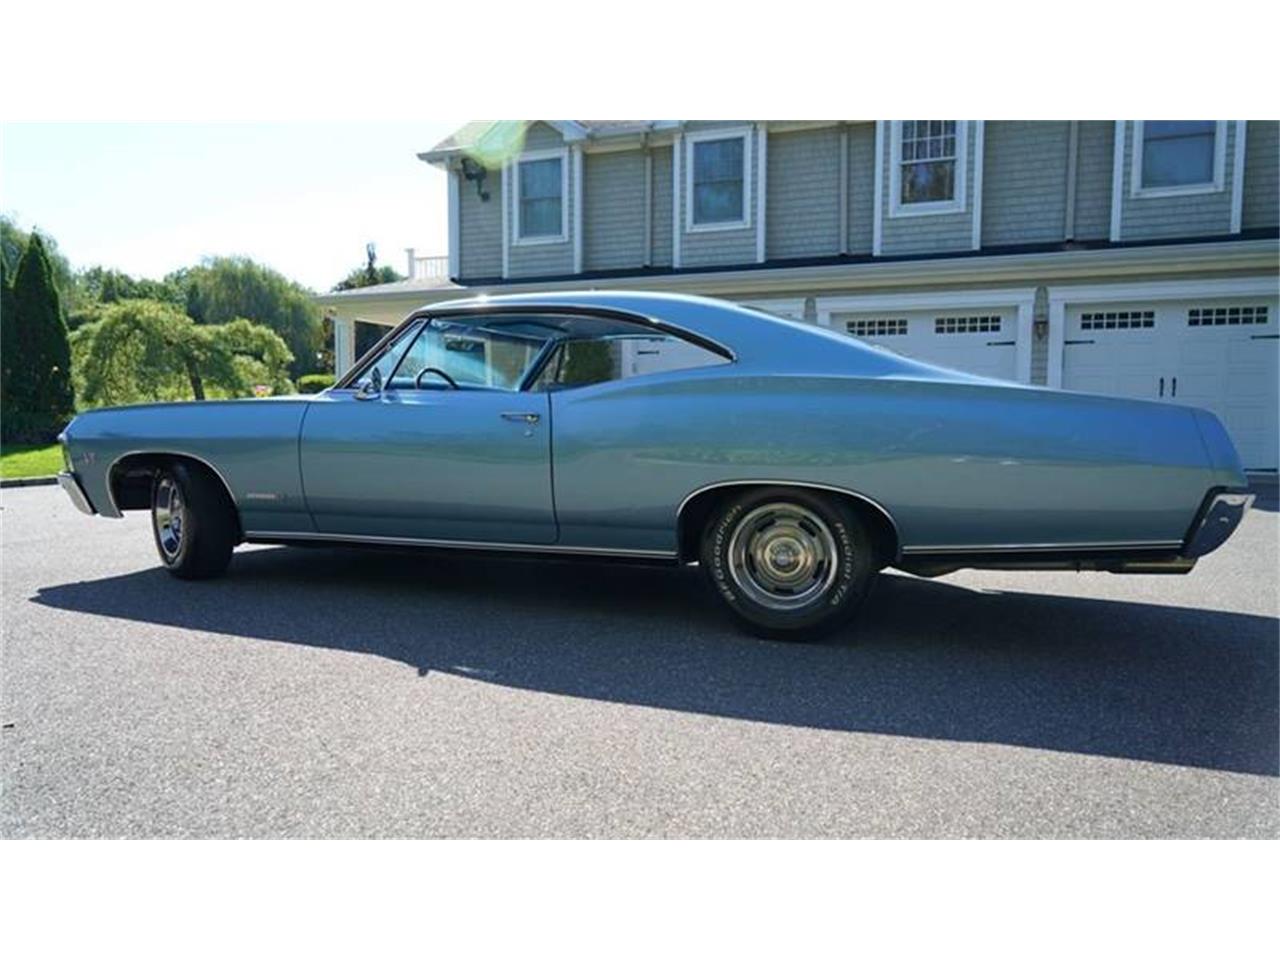 1967 Chevrolet Impala SS427 for sale in Old Bethpage , NY - photo 6.